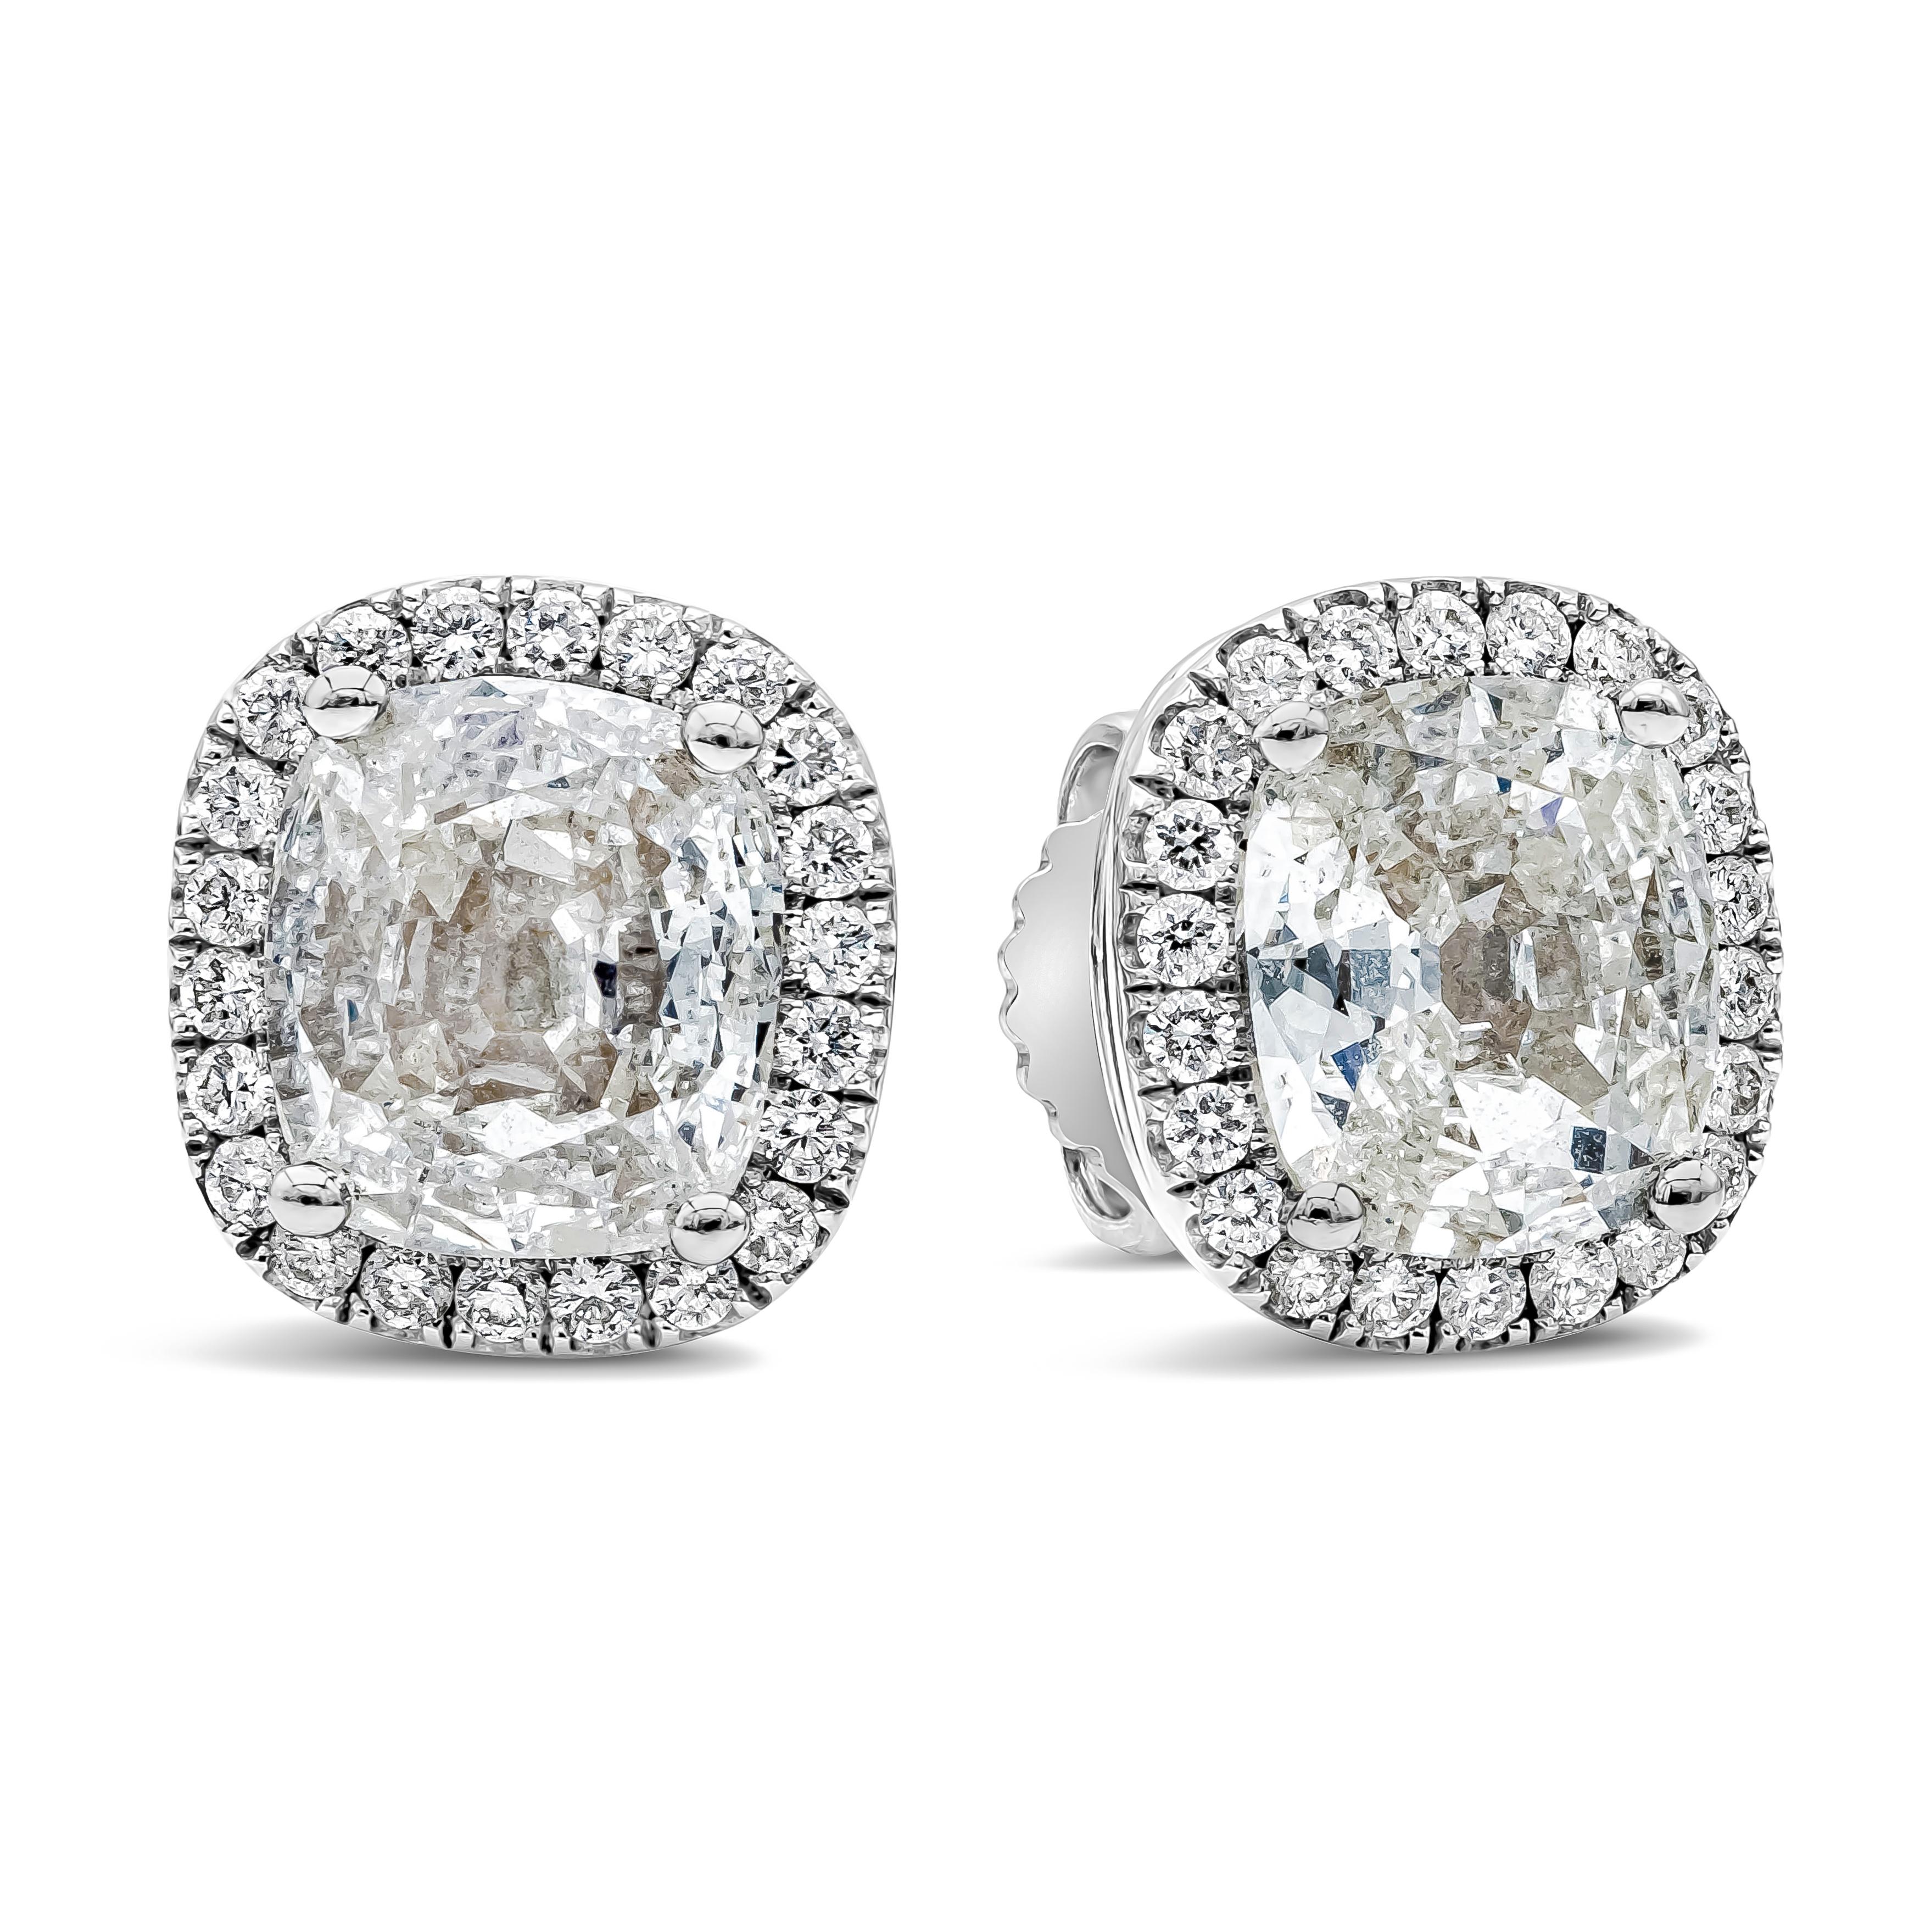 A classic pair of stud earrings showcasing a 2.03 carats cushion cut diamond certified by EGL as G-H color and VS2-SI1 in clarity, set in a classic four prong setting. Surrounded by a single row of brilliant round diamonds weighing 0.29 carats